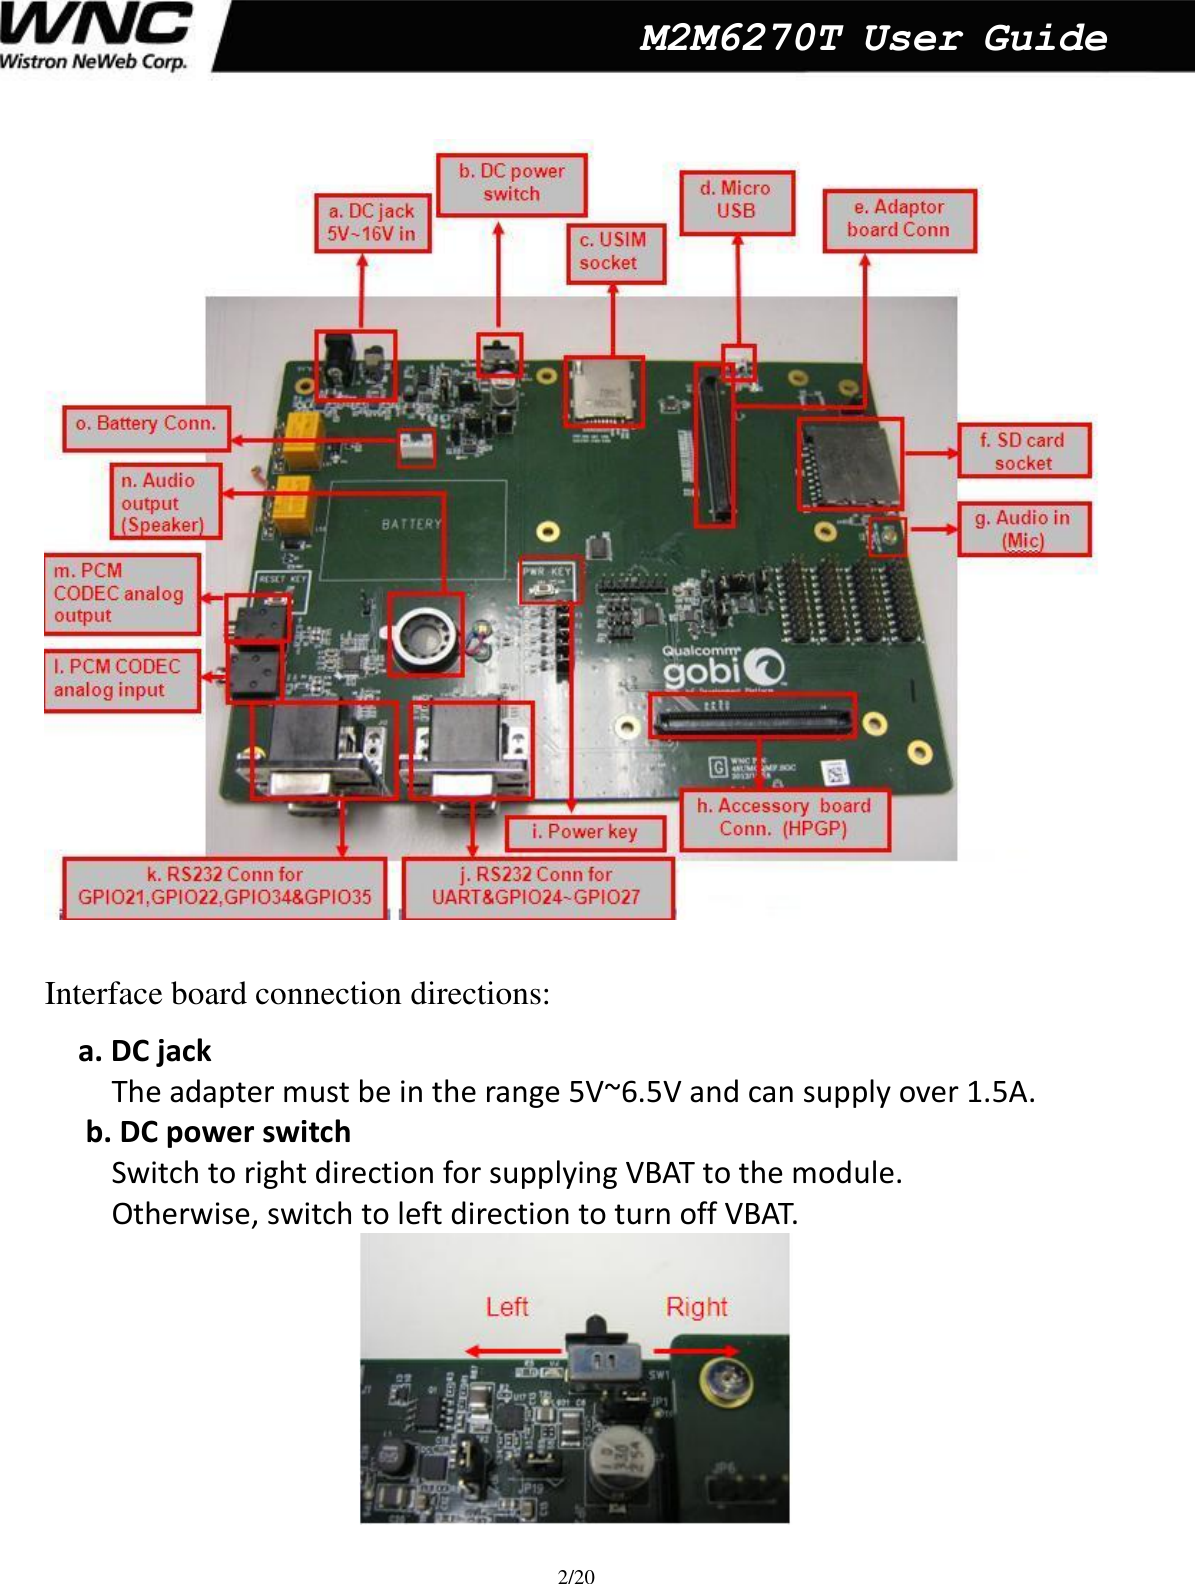  2/20  M2M6270T User Guide   Interface board connection directions: a. DC jack   The adapter must be in the range 5V~6.5V and can supply over 1.5A.    b. DC power switch   Switch to right direction for supplying VBAT to the module.   Otherwise, switch to left direction to turn off VBAT.     